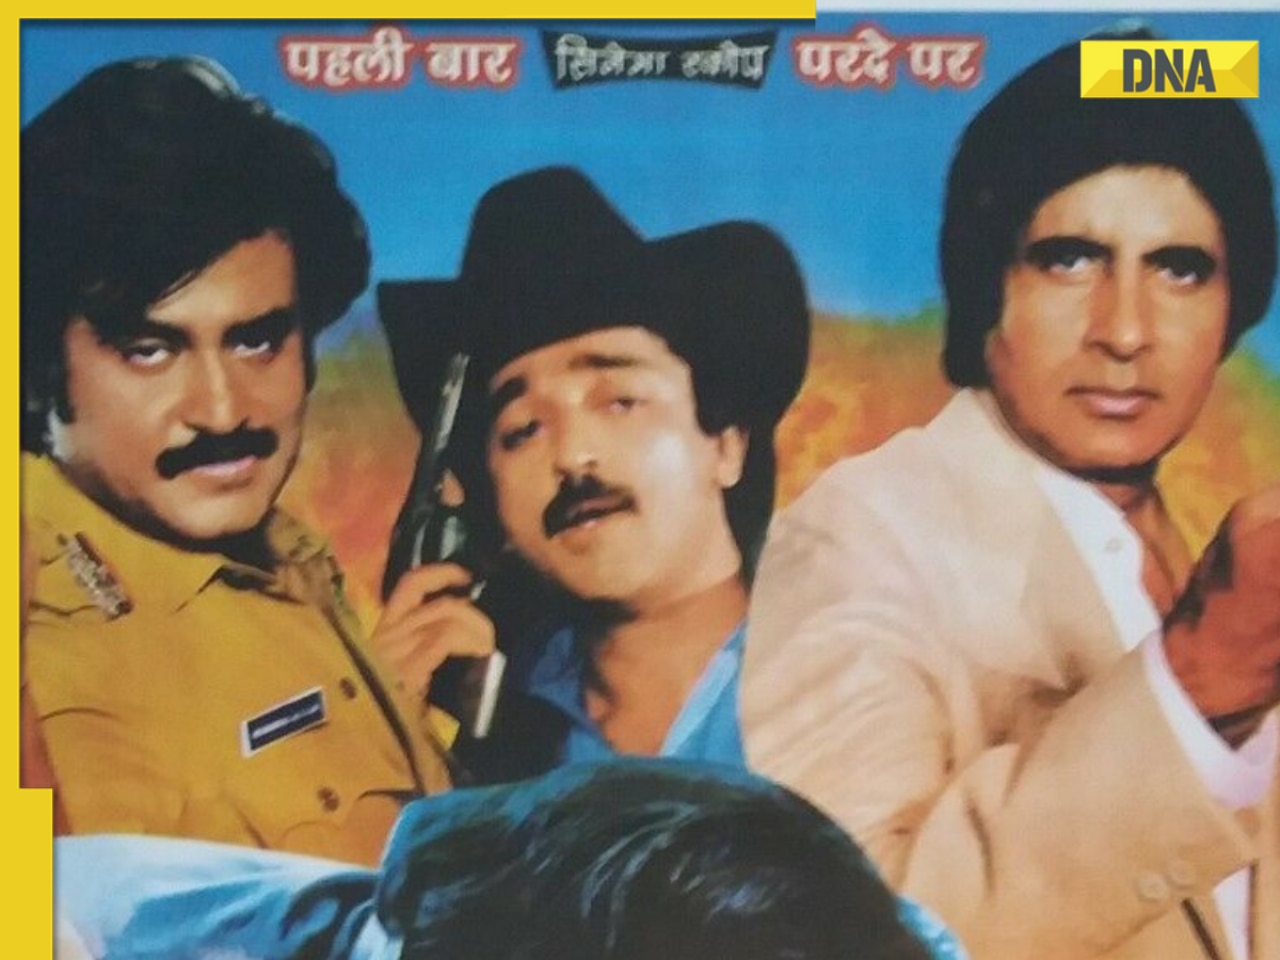 Only film to star Amitabh, Kamal Haasan, Rajinikanth together earned just Rs 5 crore; Big B quit films after it till...